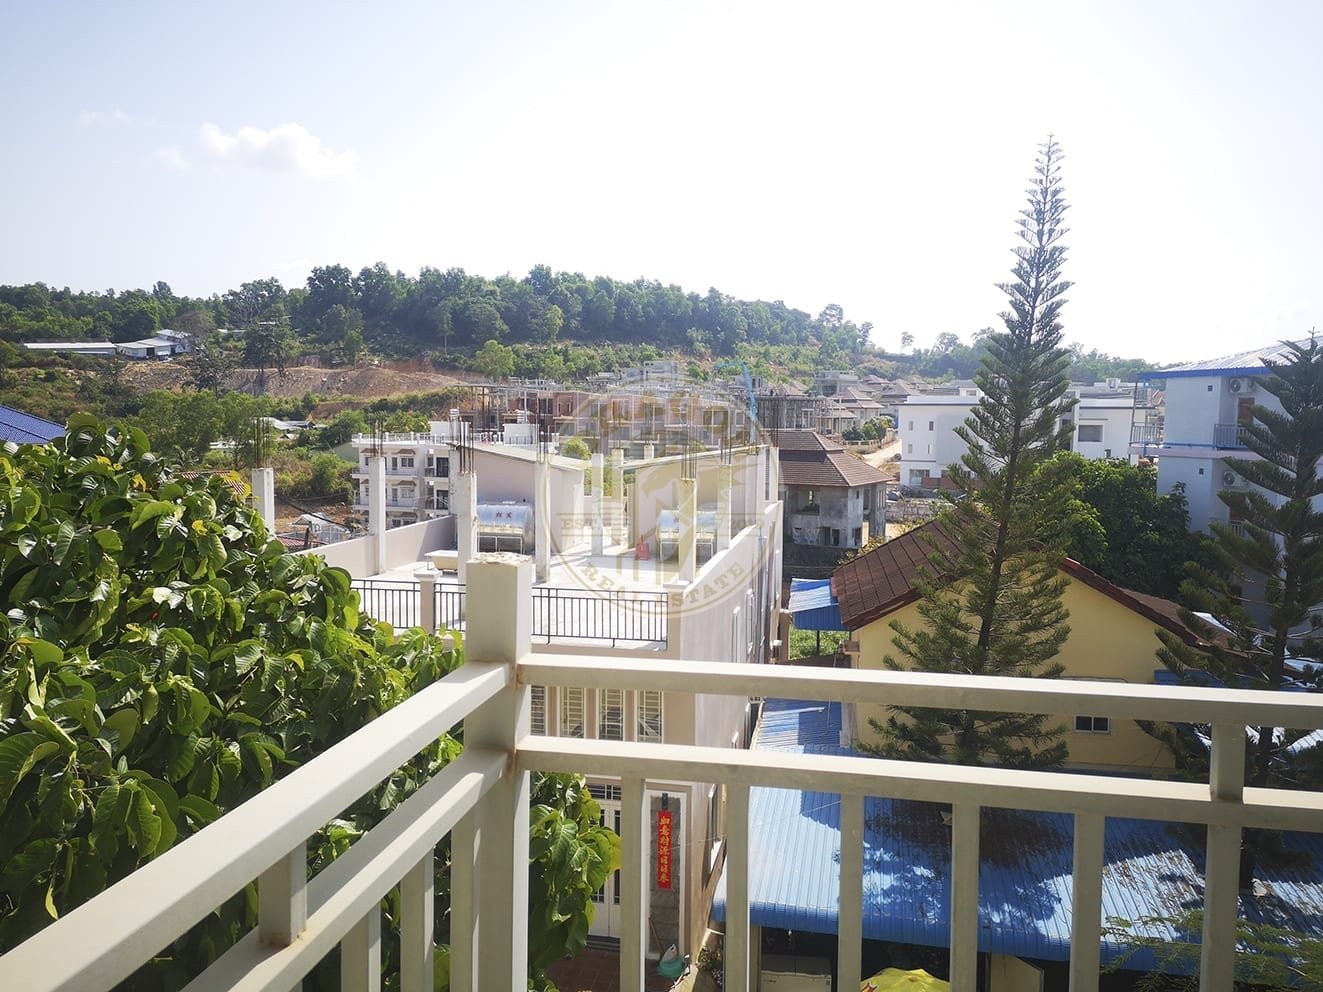 Apartment w/ Two balconies for Rent. Sihanoukville Cambodia Property Sale